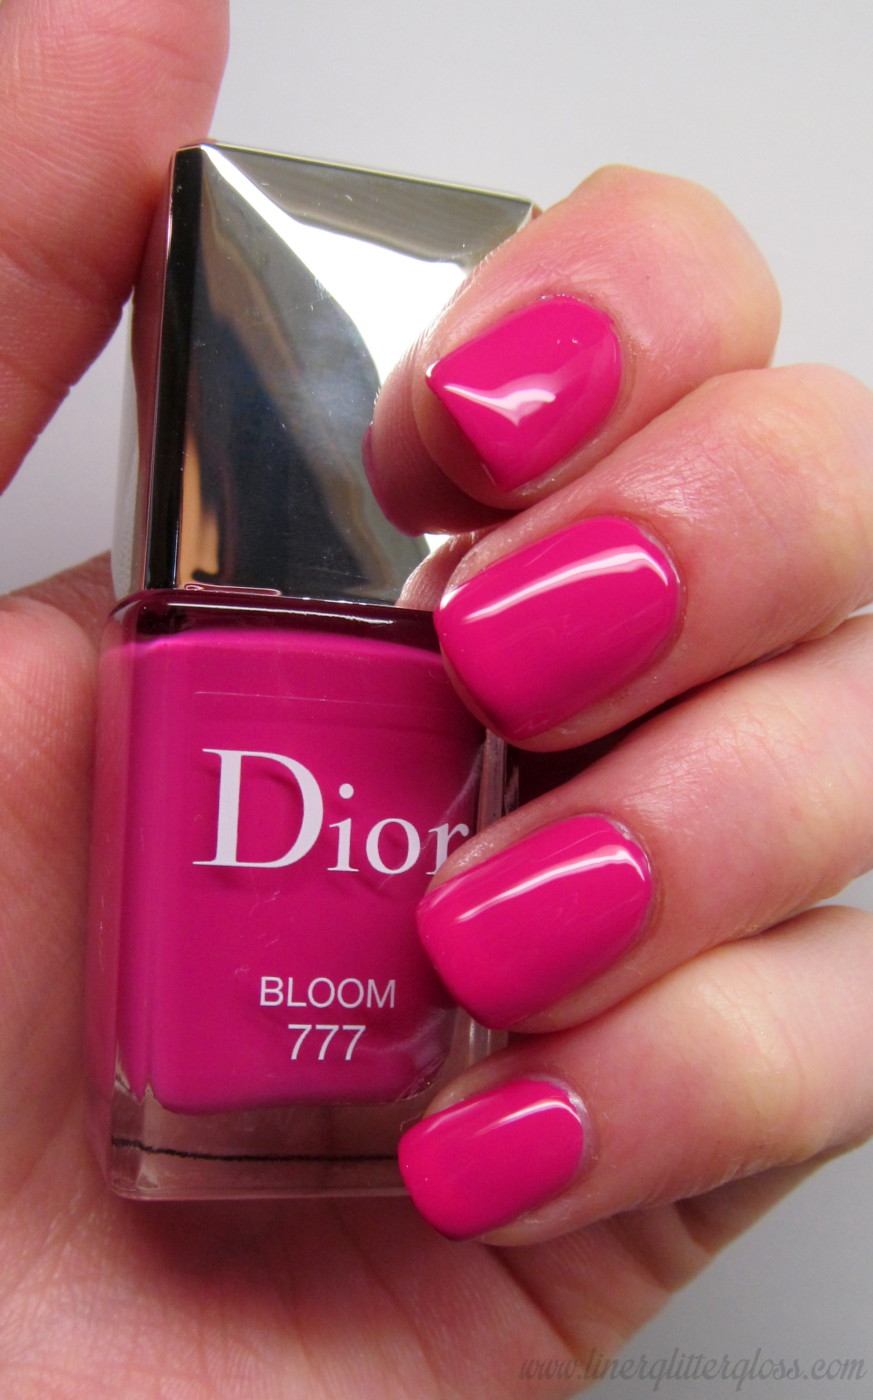 Dior 5 Couleurs Trianon Edition #954 Pink Pompadour from Spring